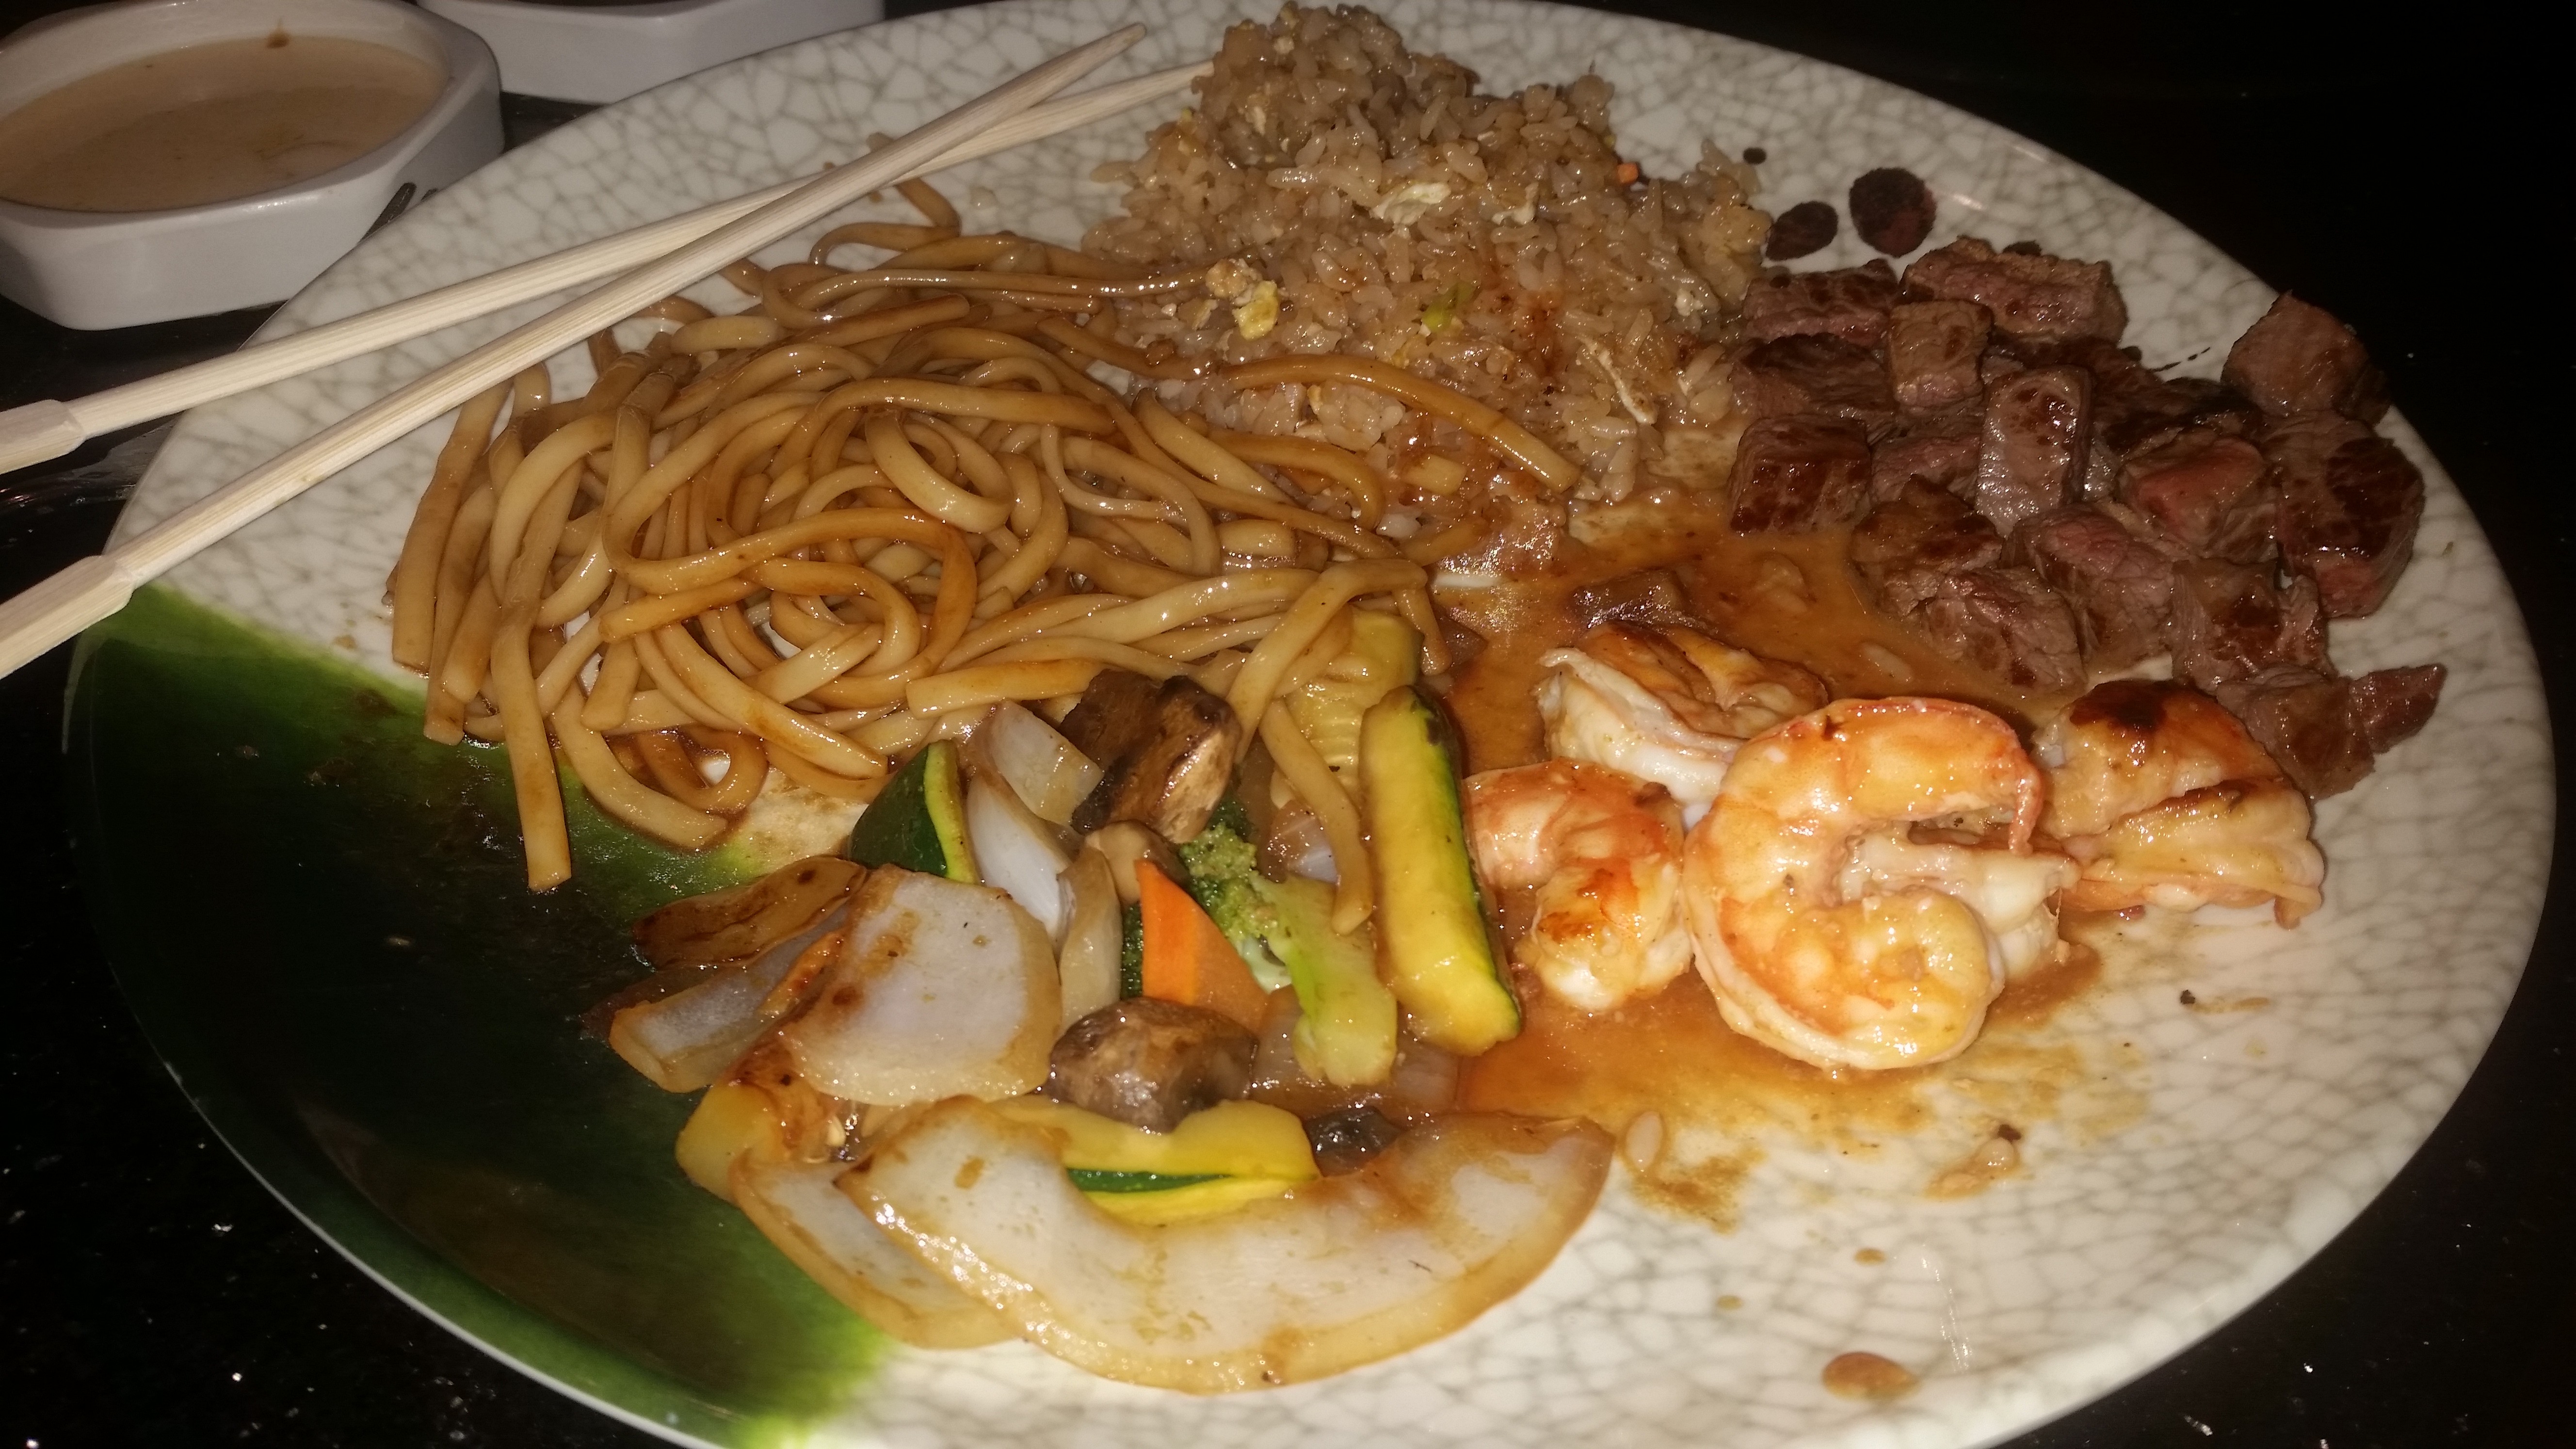 The finished meal with shrimp, N.Y. strip steak, sauteed vegetables, fried noodles and fried rice. (Photo: Mark Heckathorn/DC on Heels)